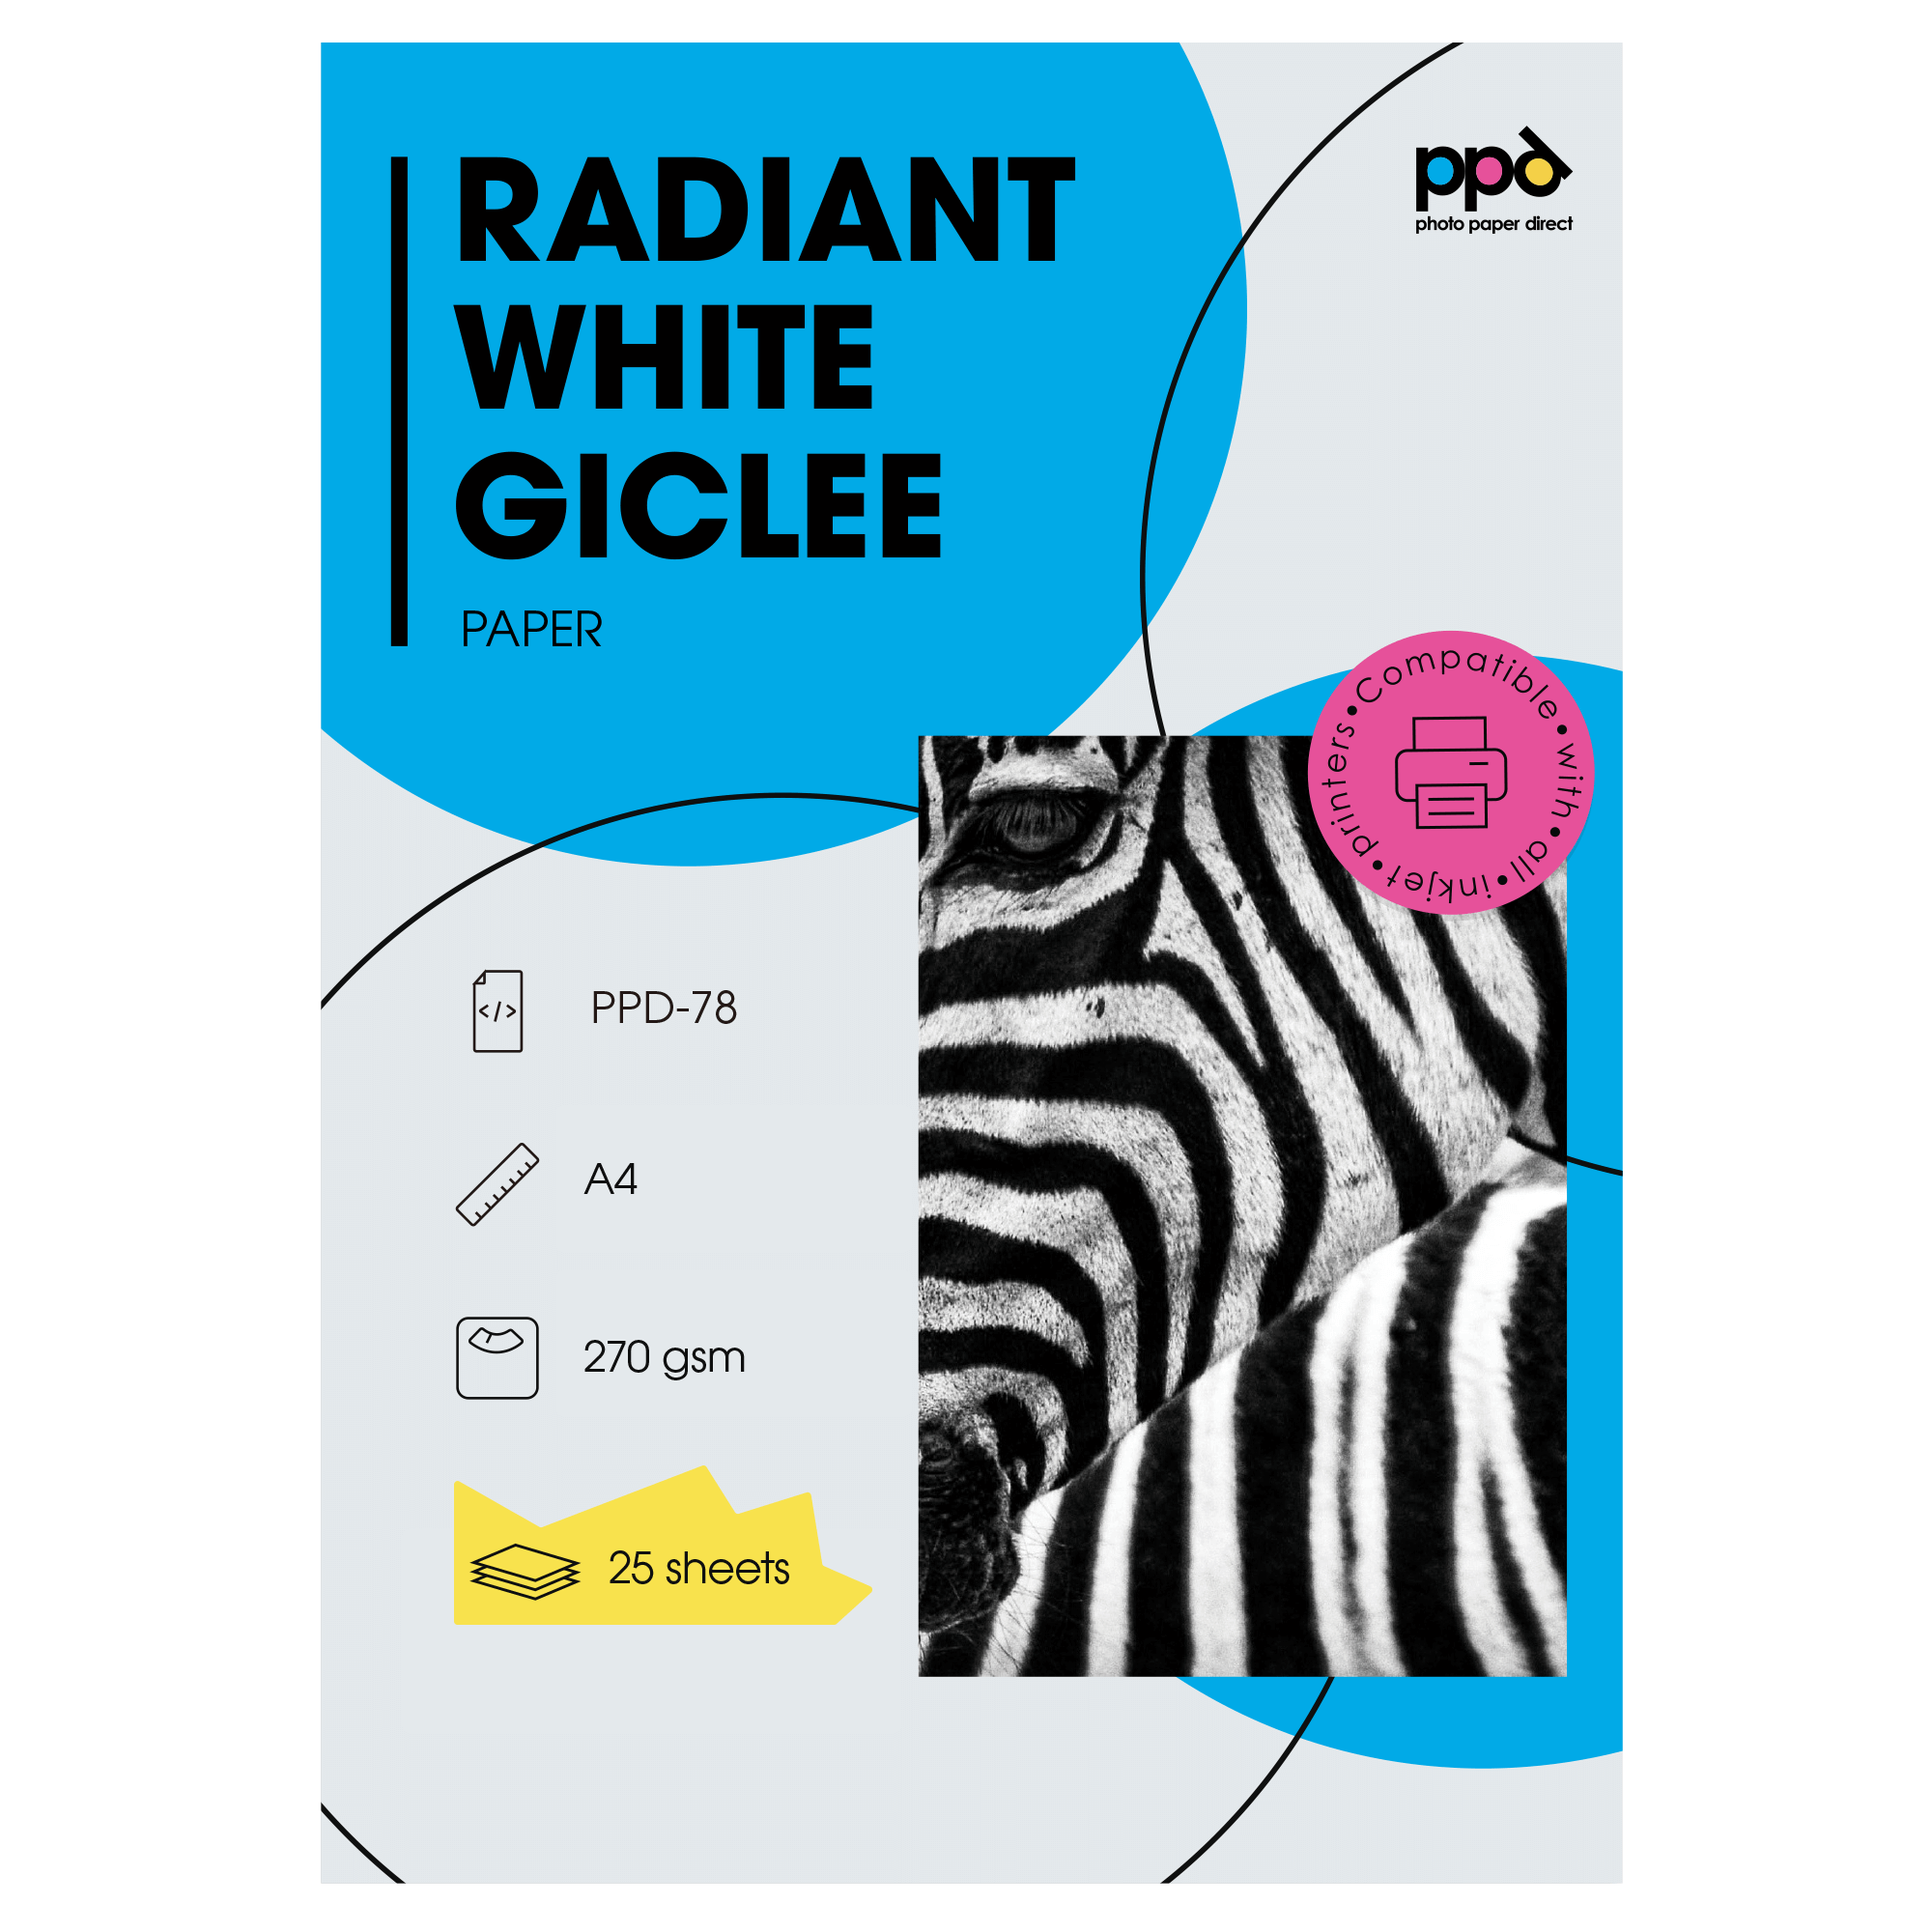 PPD Inkjet Photo Radiant White Giclee Paper 65lb (270gsm) A4 PPD-78